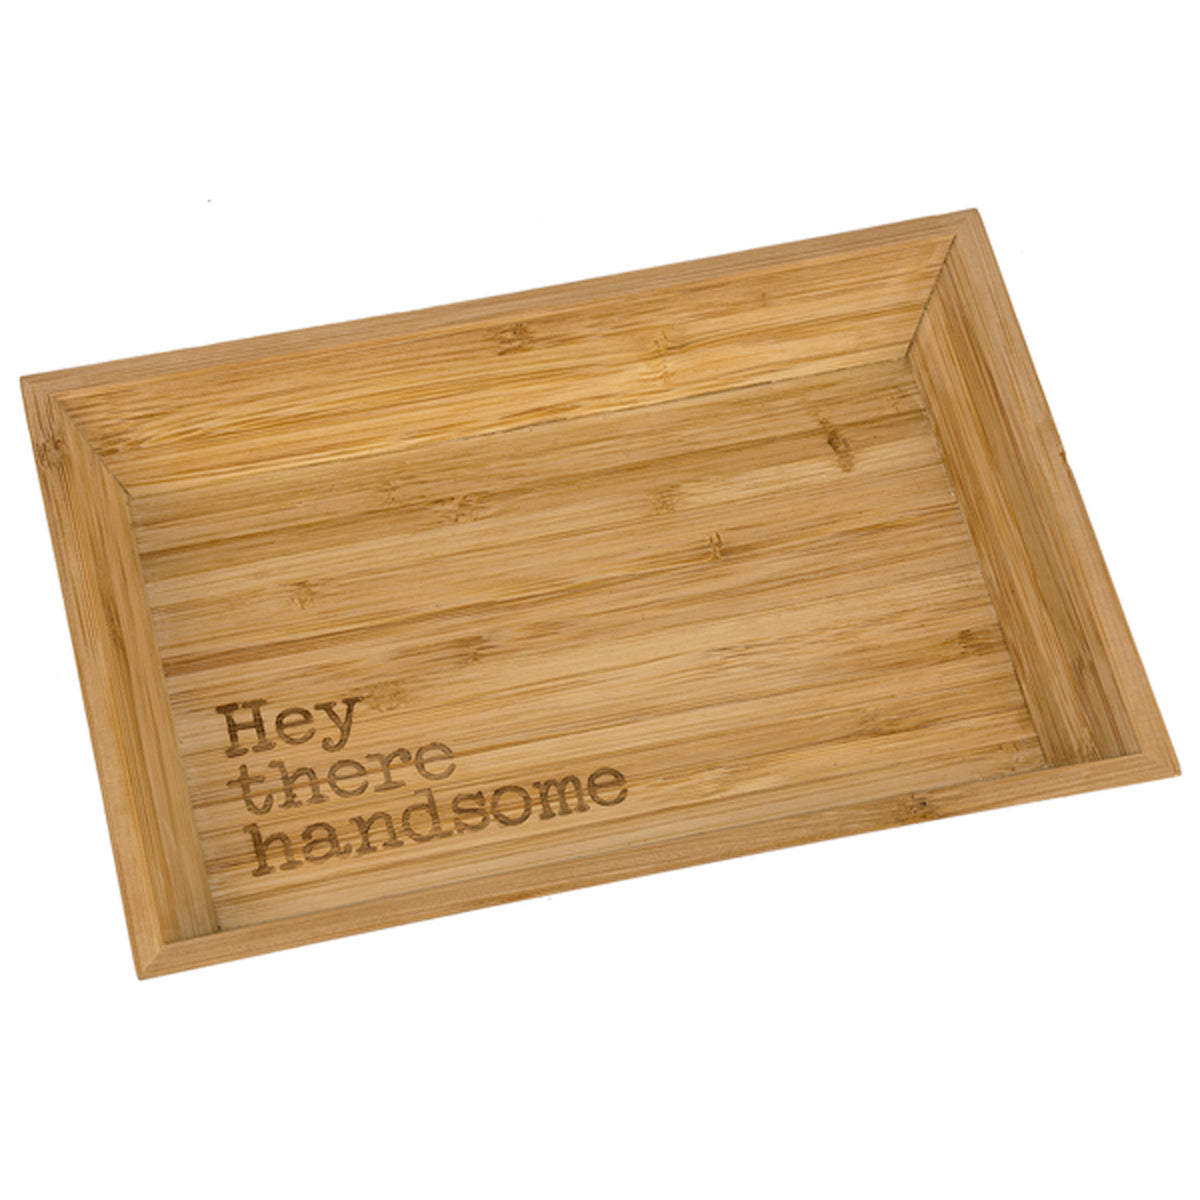 Lasercut Bamboo Wood Catch All Tray -" Hey there handsome"